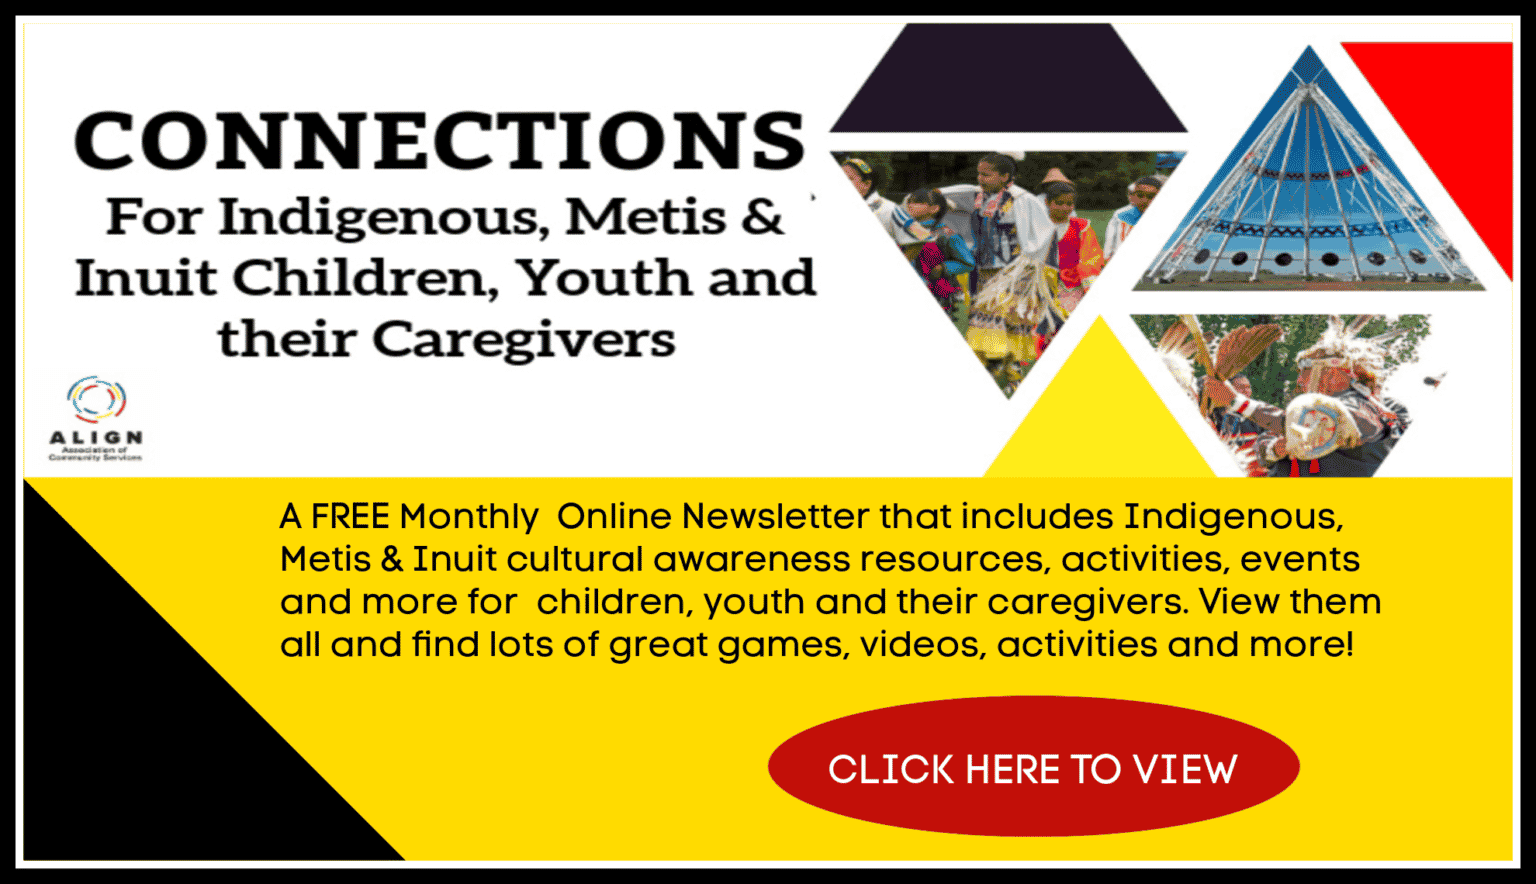 Advertisement with pictures of indigenous gathering in one corner. Text readsCONNECTION Newsletter for Indigenous, Metis and Inuit Children, Youth and Their Caregivers. Free Monthly newsletter that includes games, activities, events, and more Click on Image to View Selection of Newsltters